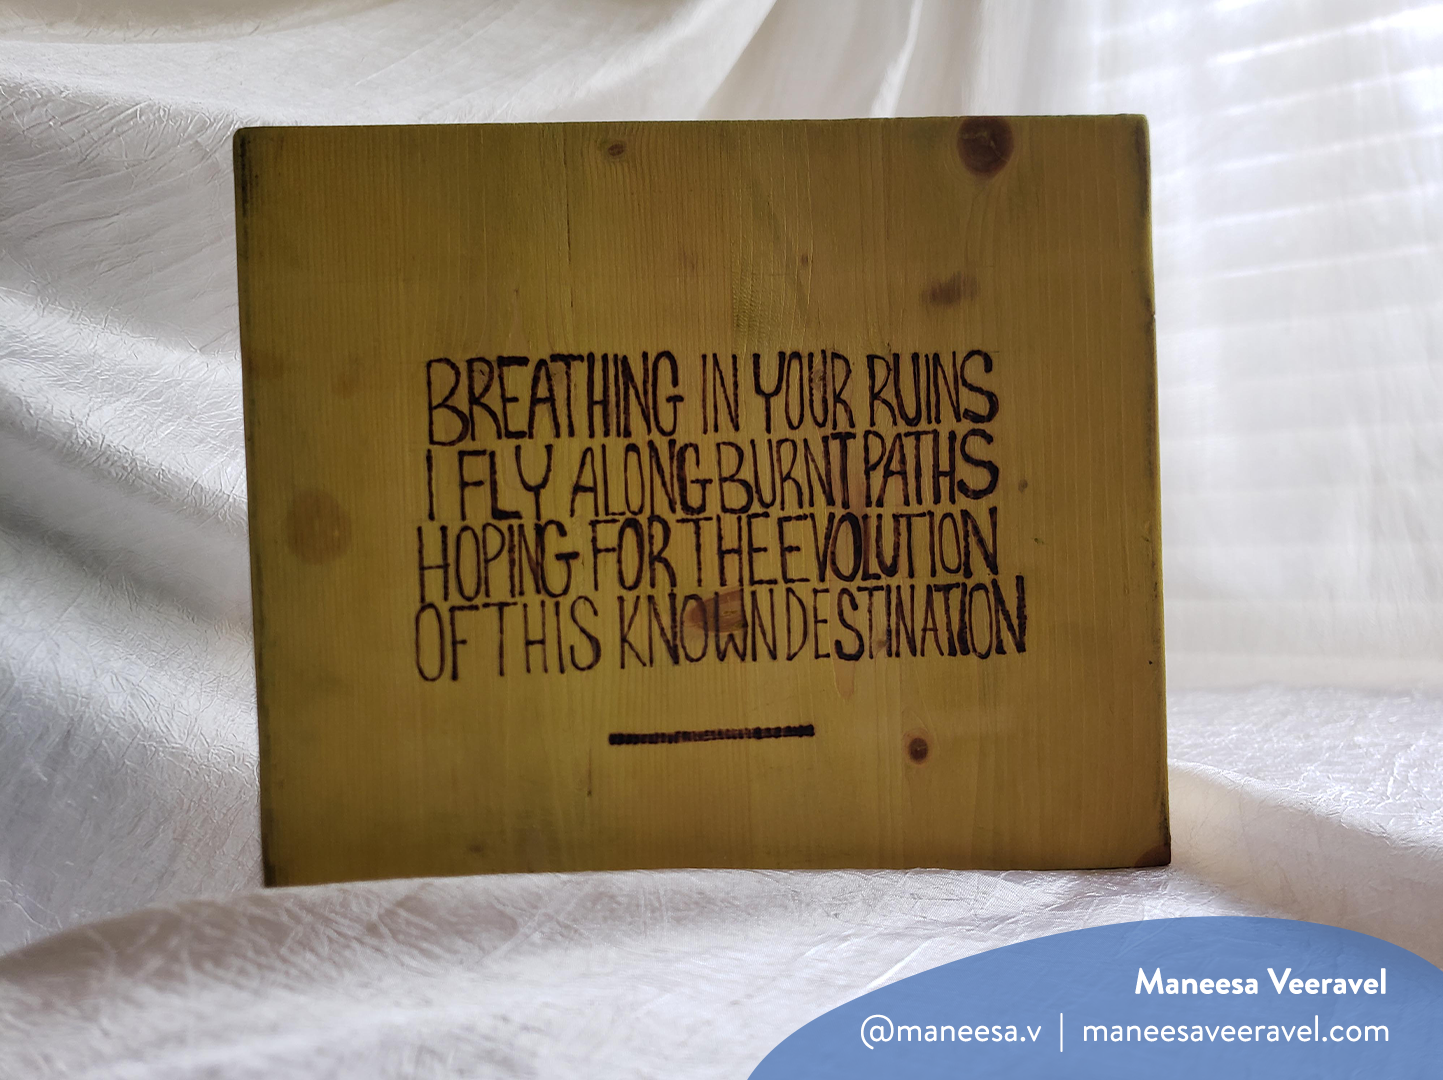 Horizontal photo of wood-burned artwork on a white fabric background by Maneesa Veeravel. It features hand-lettered text reading: “Breathing in your ruins, I fly along burnt paths, hoping for the evolution of this known destination”. The image has a watermark with Maneesa’s name, Instagram handle (@maneesa.v) and website (maneesaveeravel.com)